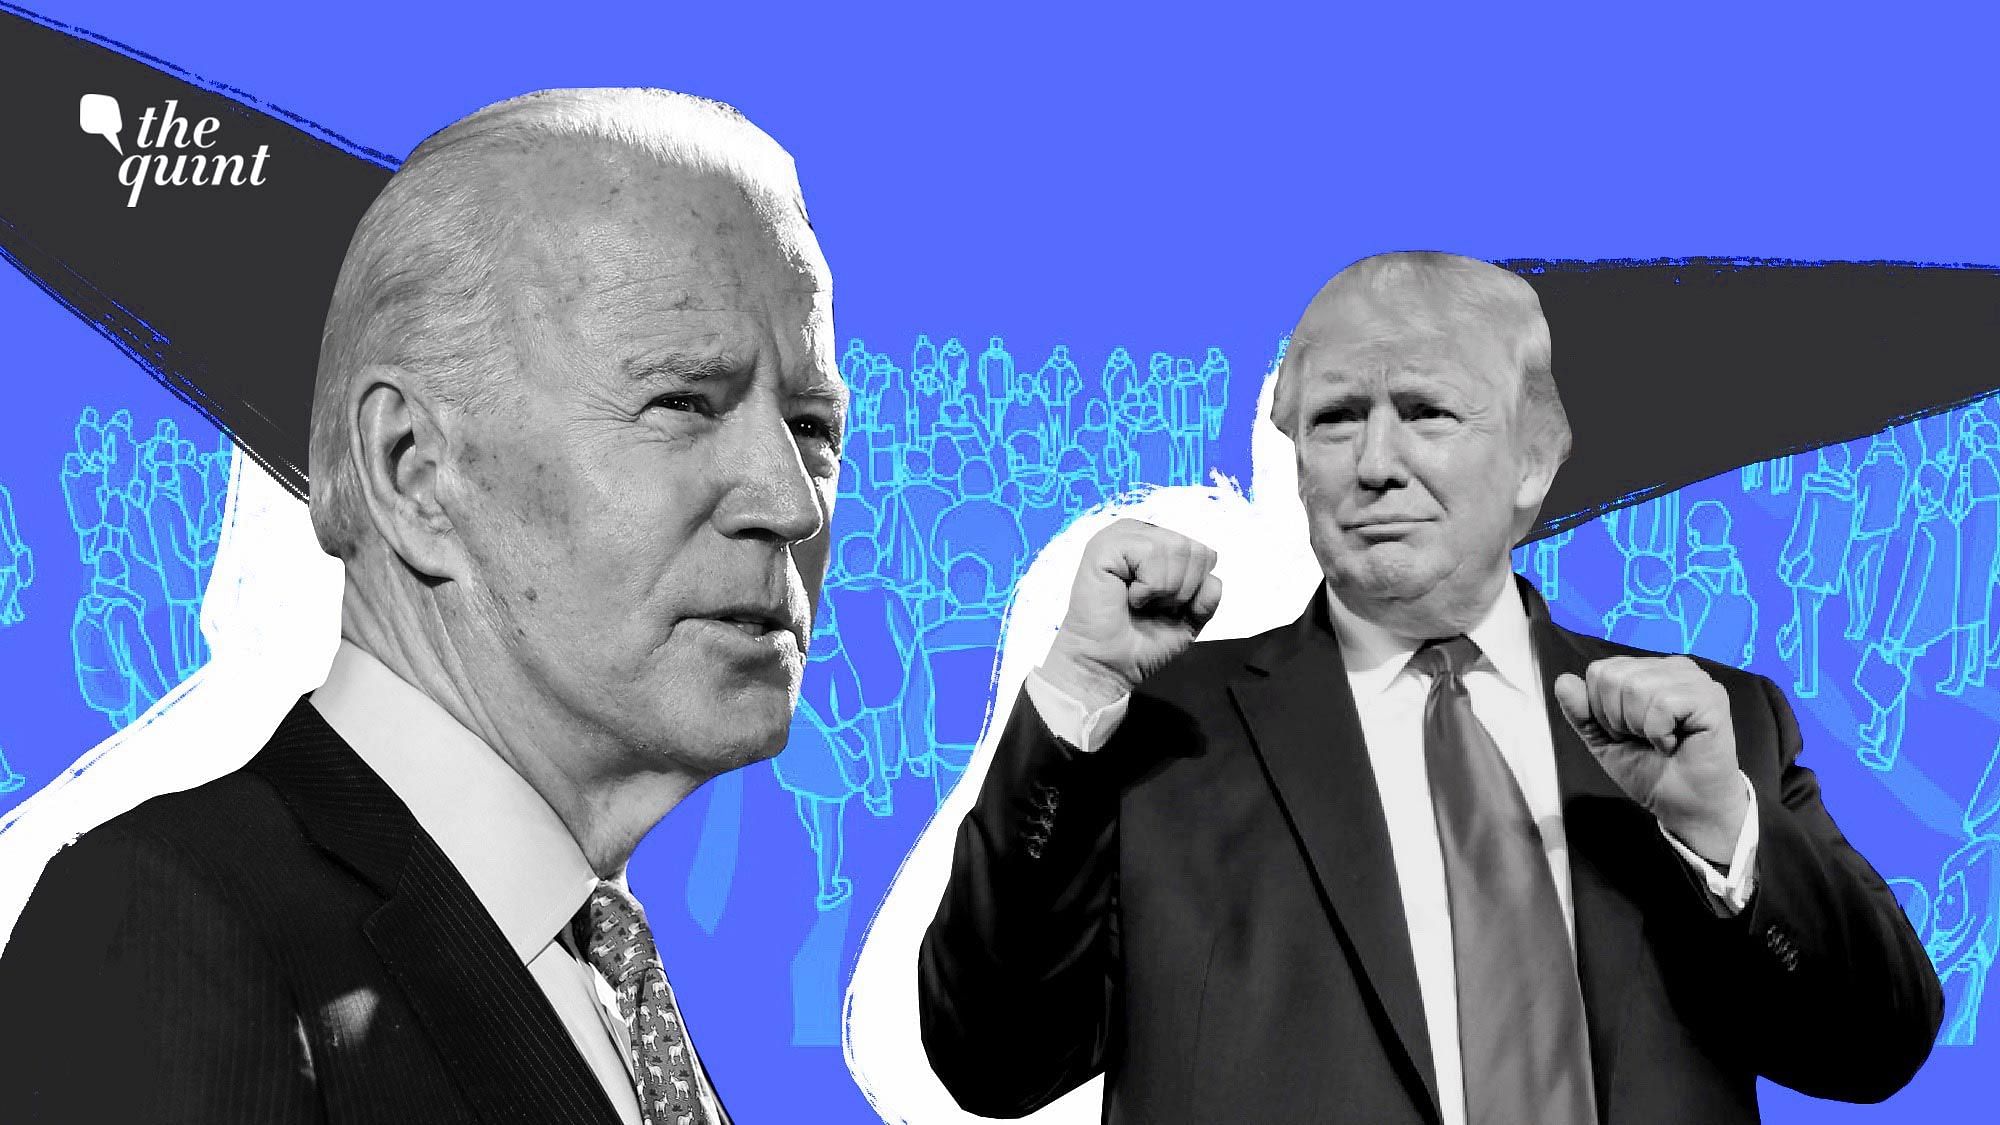 The first US Presidential Debate is a crucial one for what’s expected to be a neck-and-neck election for Donald Trump and Joe Biden according to several polls.